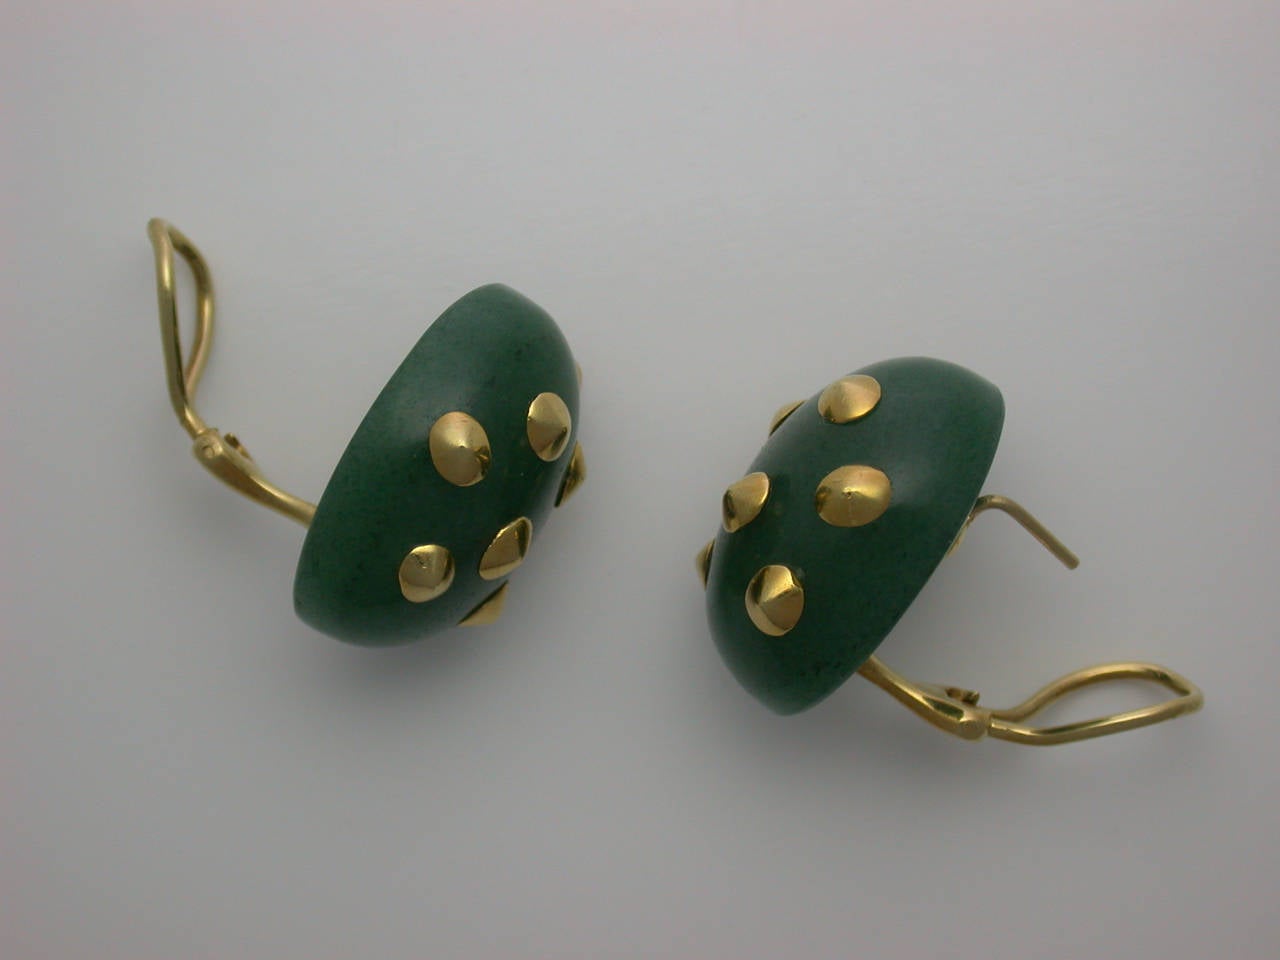 The soft, domed ovals carved from translucent green aventurine quartz, a hard stone with fine graining like that of nephrite jade, decorated playfully with randomly-placed polished yellow gold thorn accents, omega clip backs and posts, unsigned, an